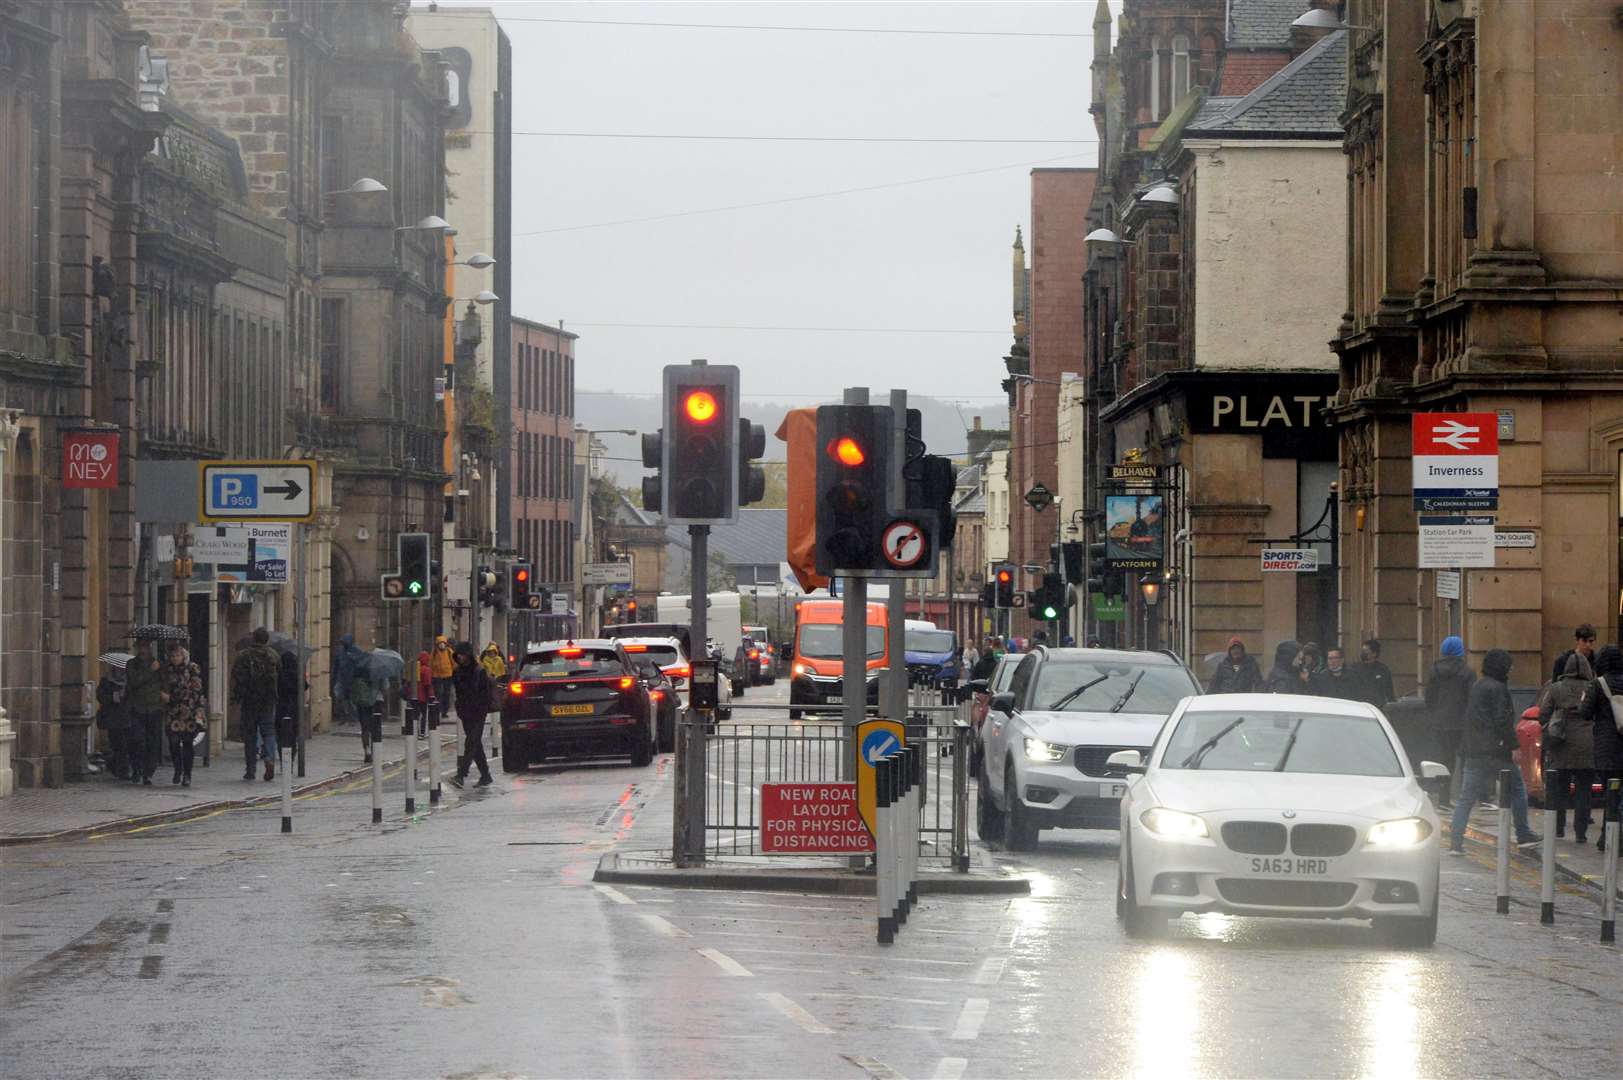 Academy Street is the subject of much dispute over vehicle access plans. Picture: James Mackenzie.